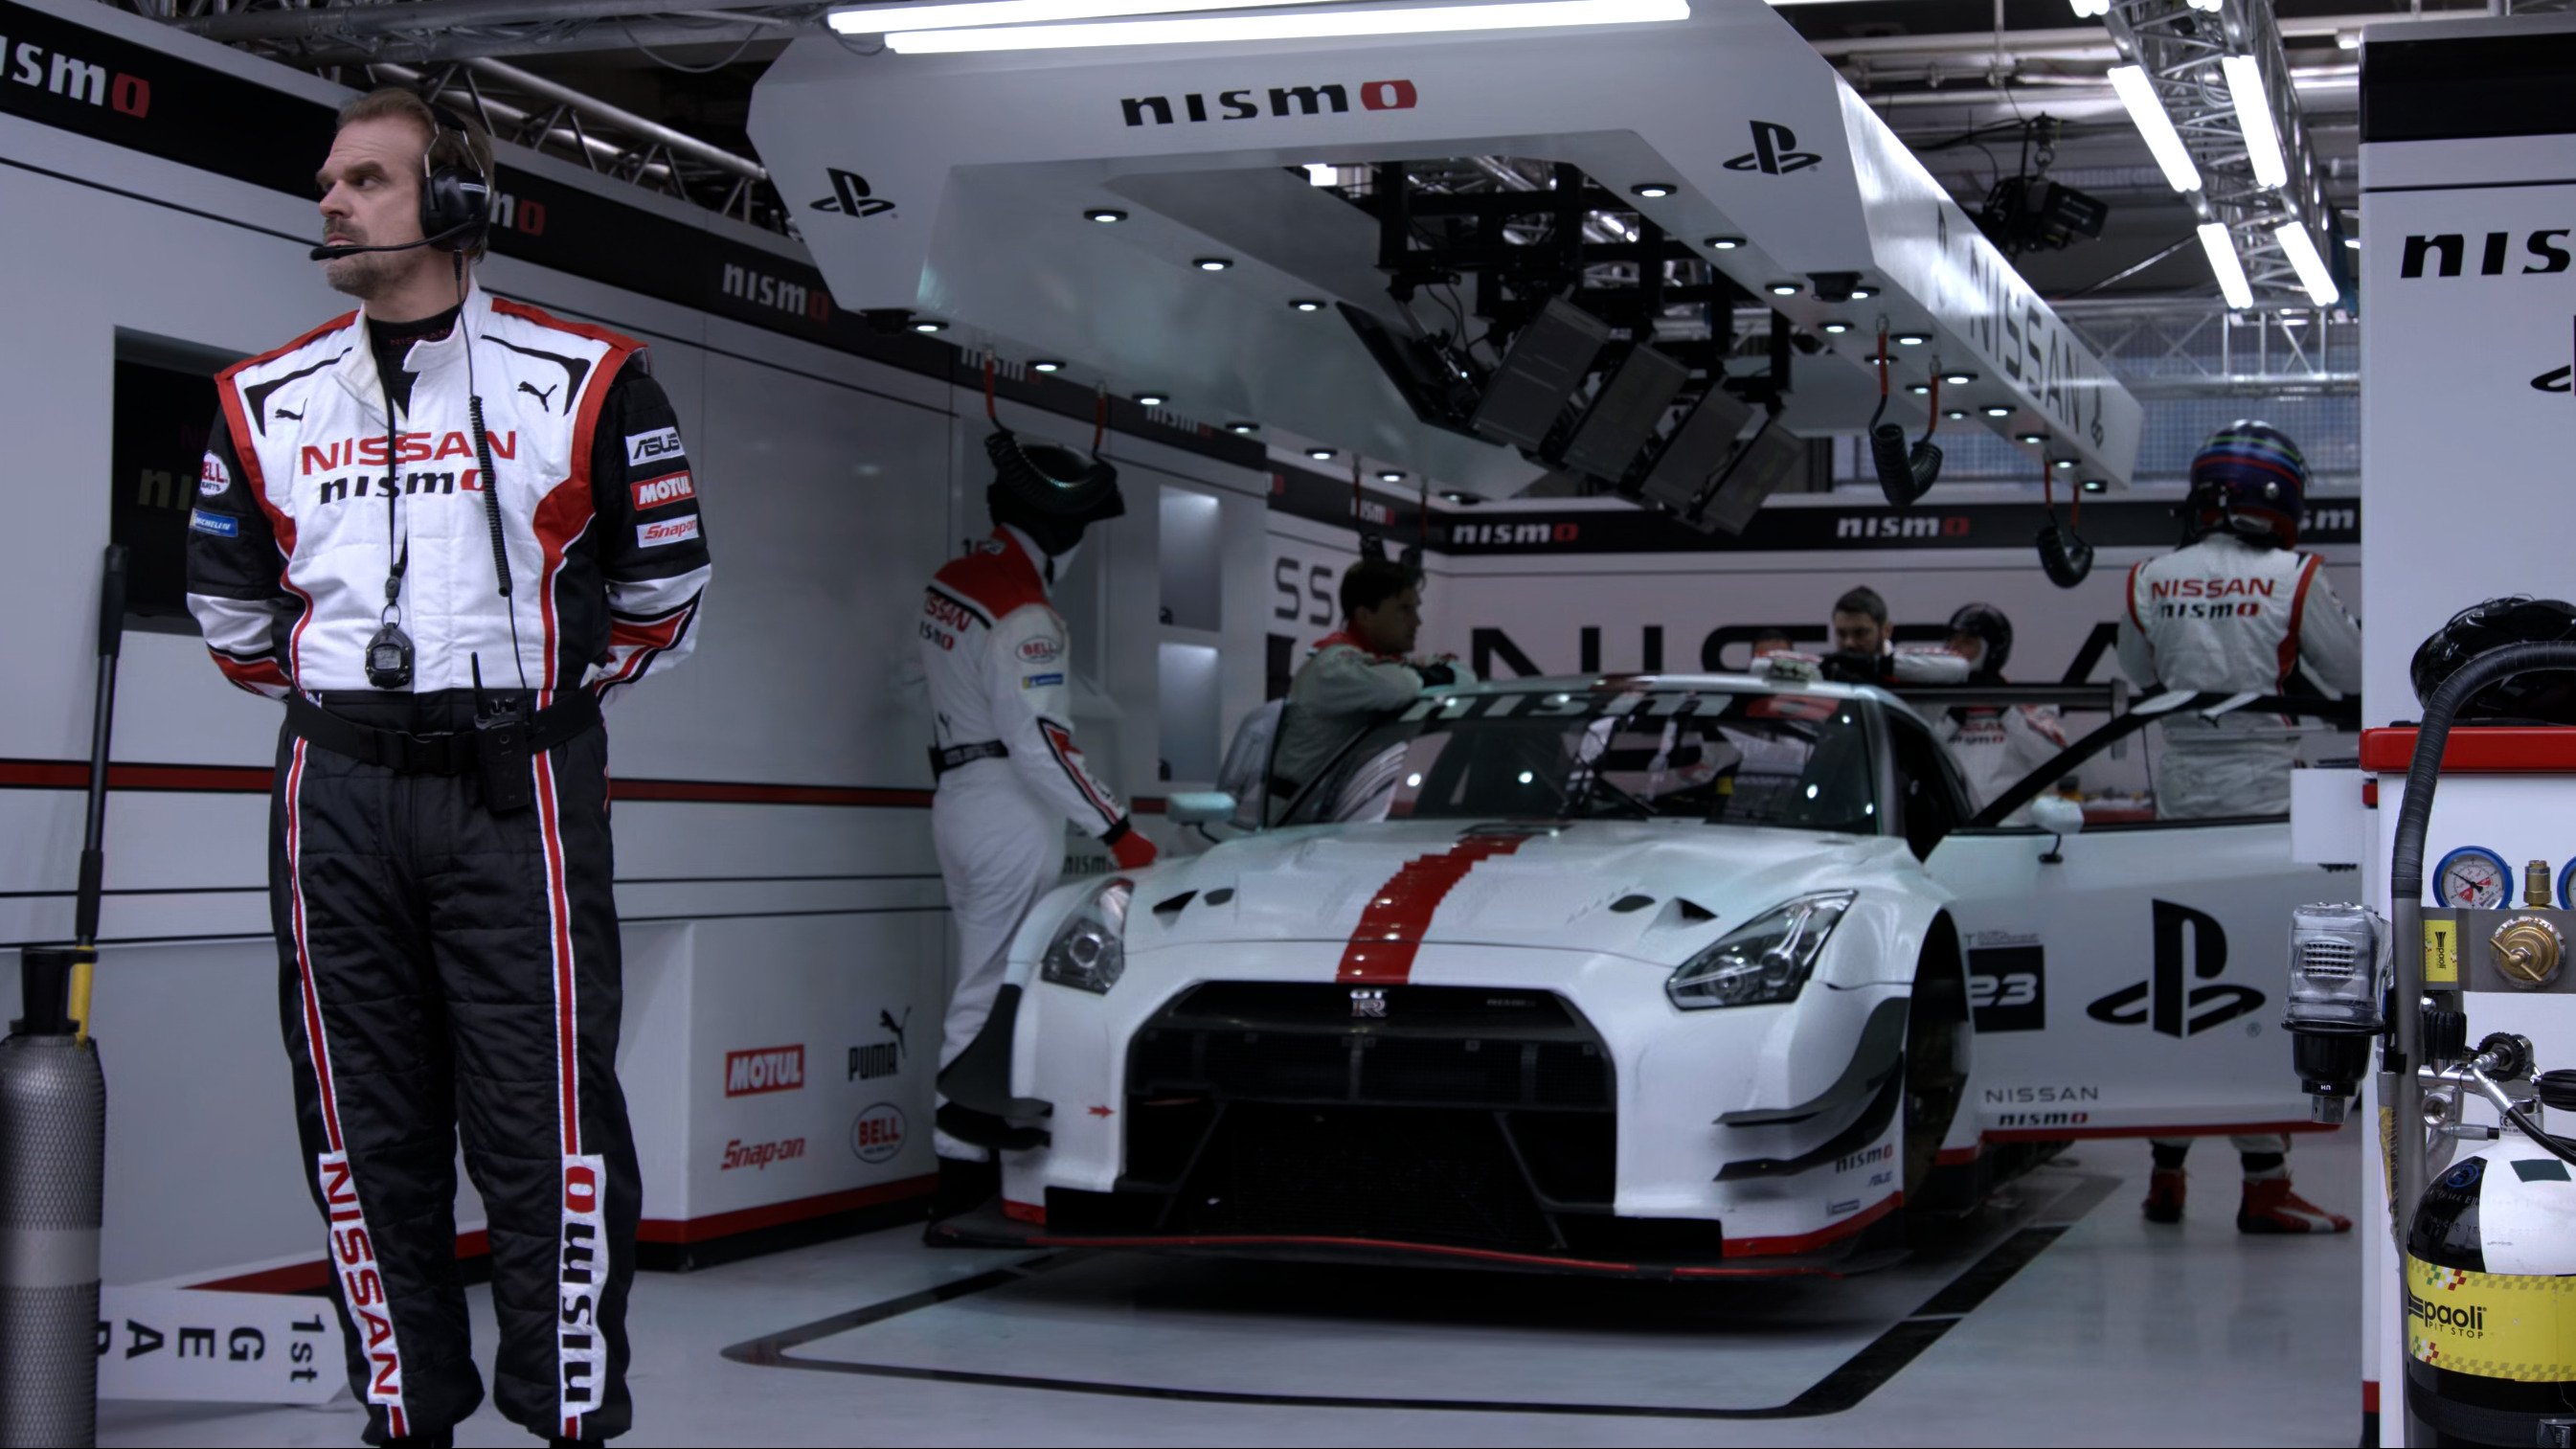 Gran Turismo 5 Includes Pretty Much Every Past GT Track (and They're  Drivable) – GTPlanet